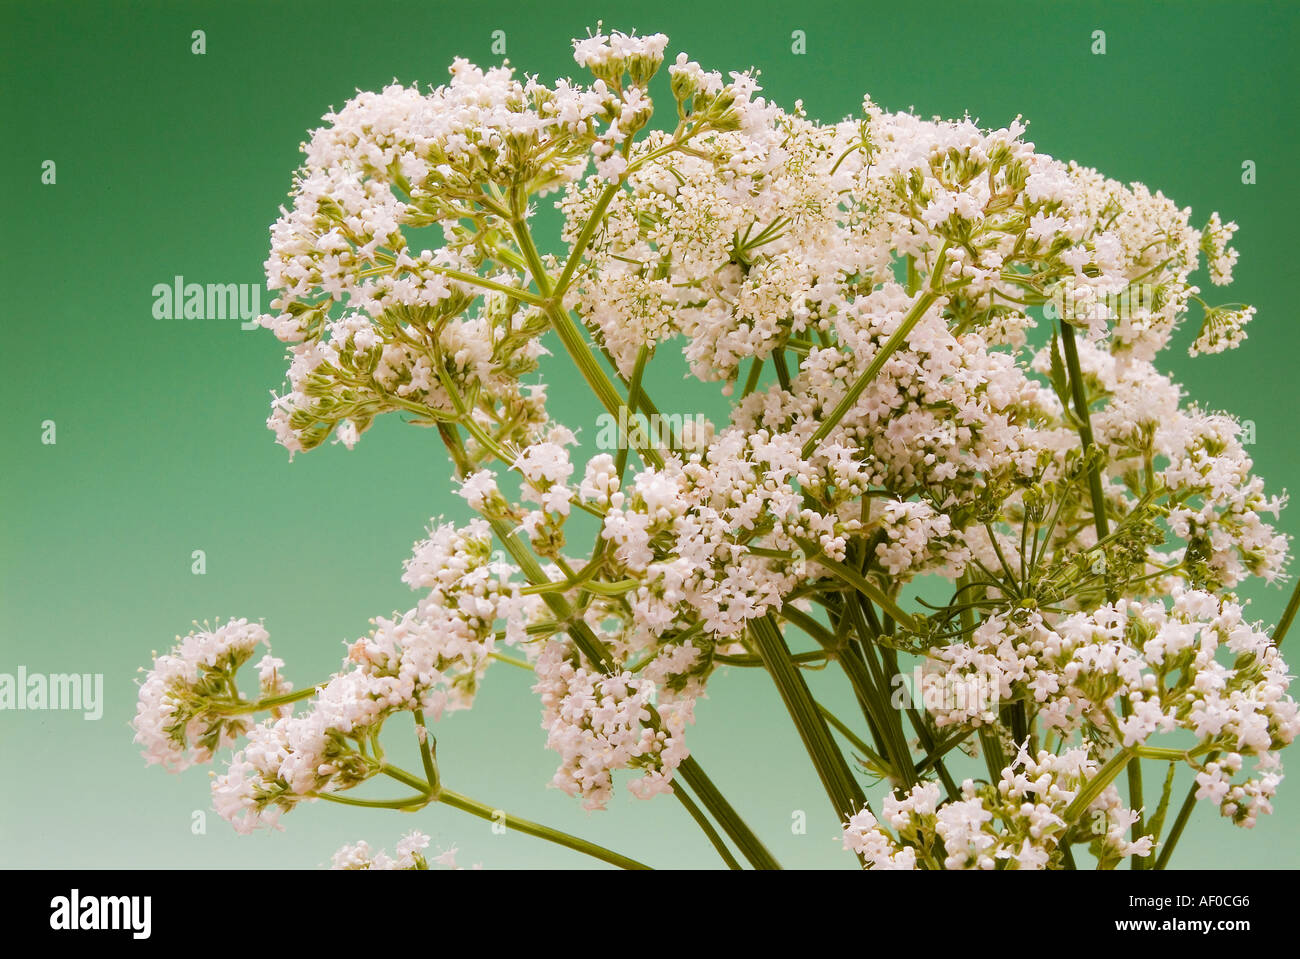 blossoms of valerian Valeriana officinalis medical plant sedative calming effect promotion of sleep inhibition of fears Stock Photo